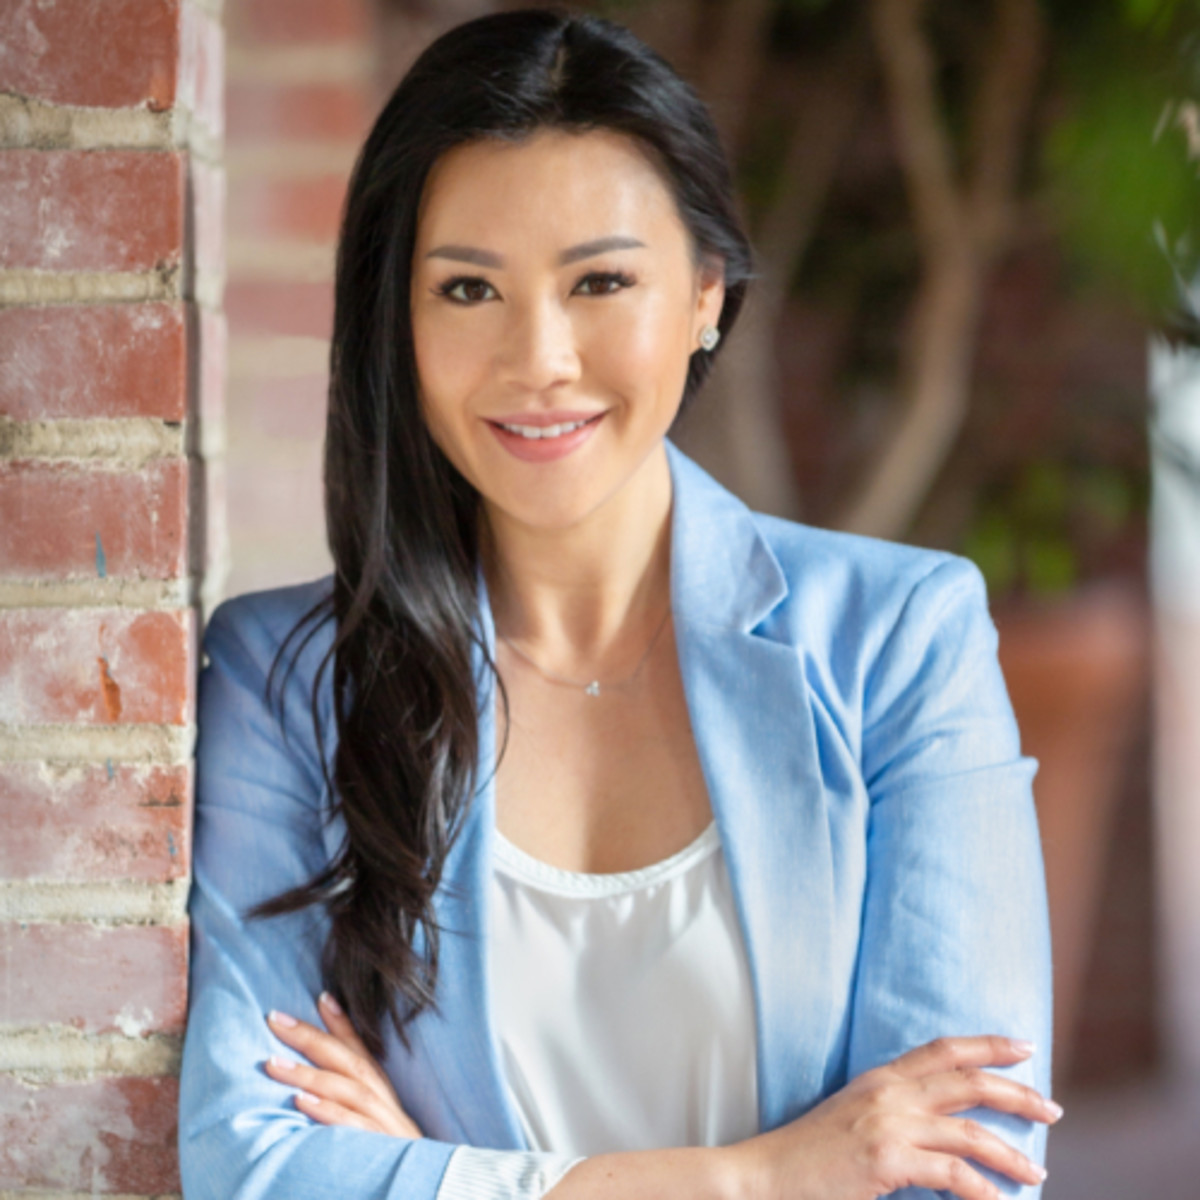 Sung’s investment portfolio of early-stage companies spans across sectors and geographies. Some of her notable investments include Pilotly, Nicolette, Gel-E, Bakkt, and Robinhood